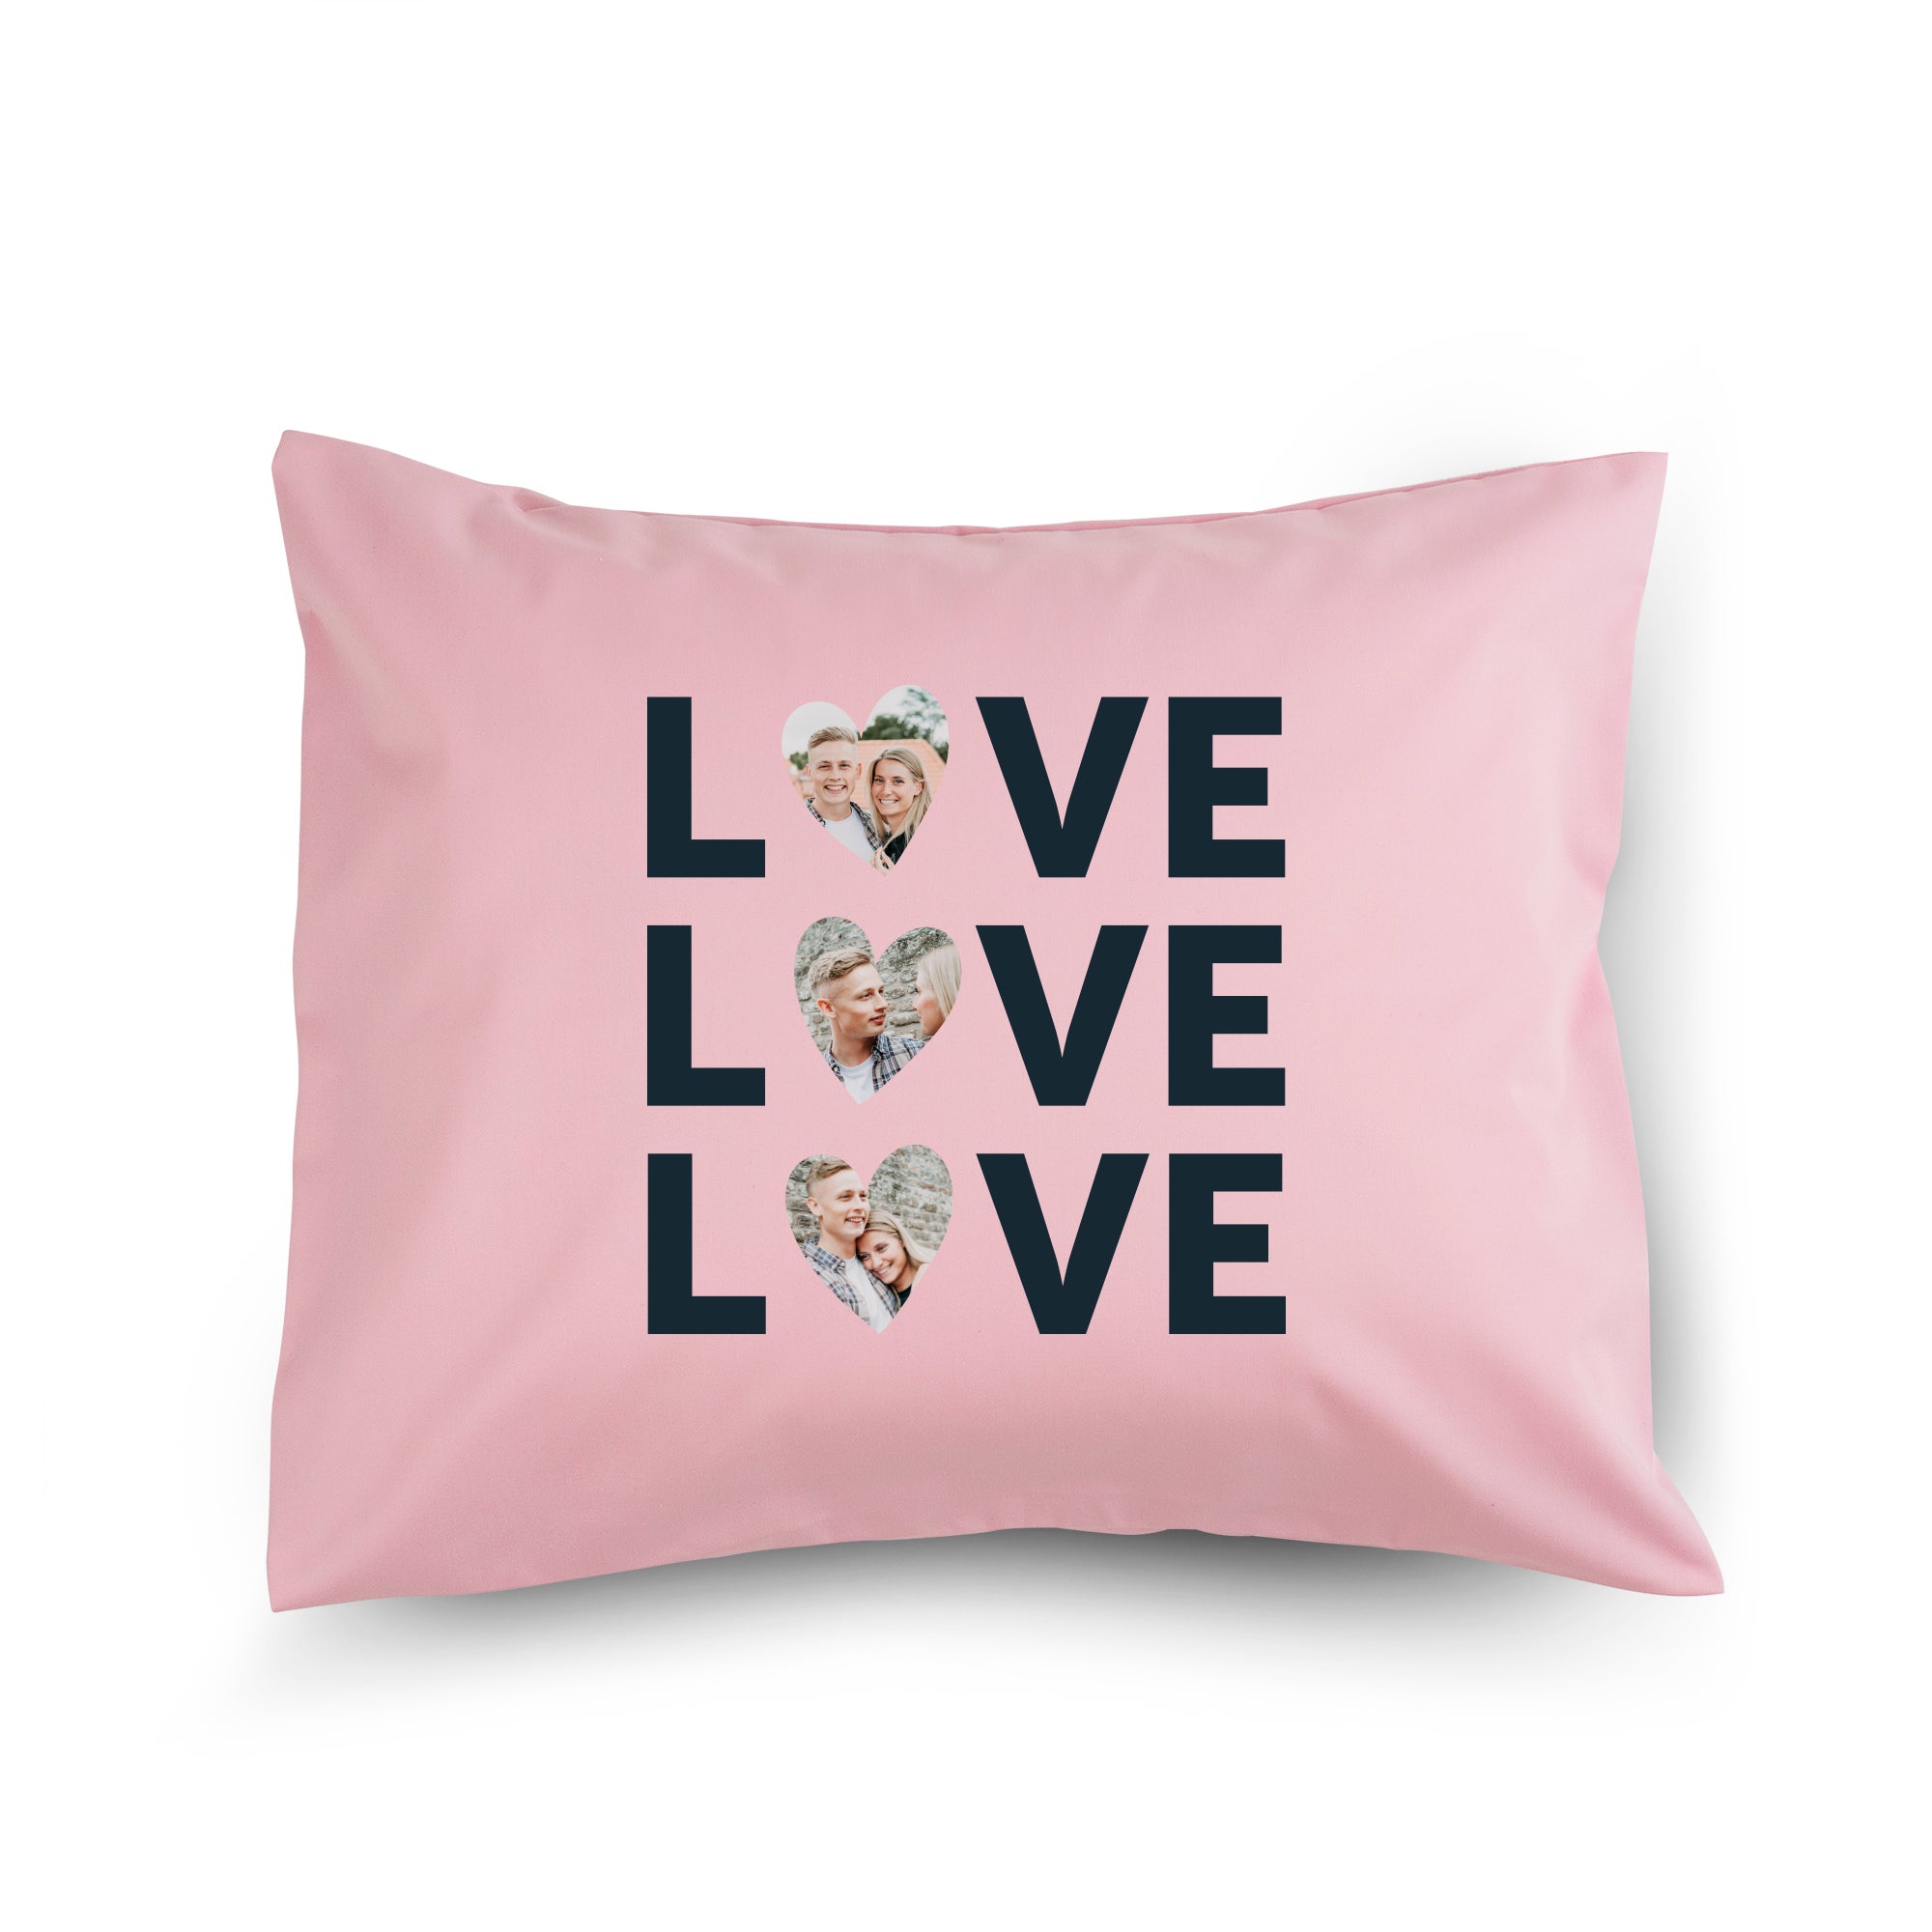 Personalised cushion case - Pink - 50 x 60 cm